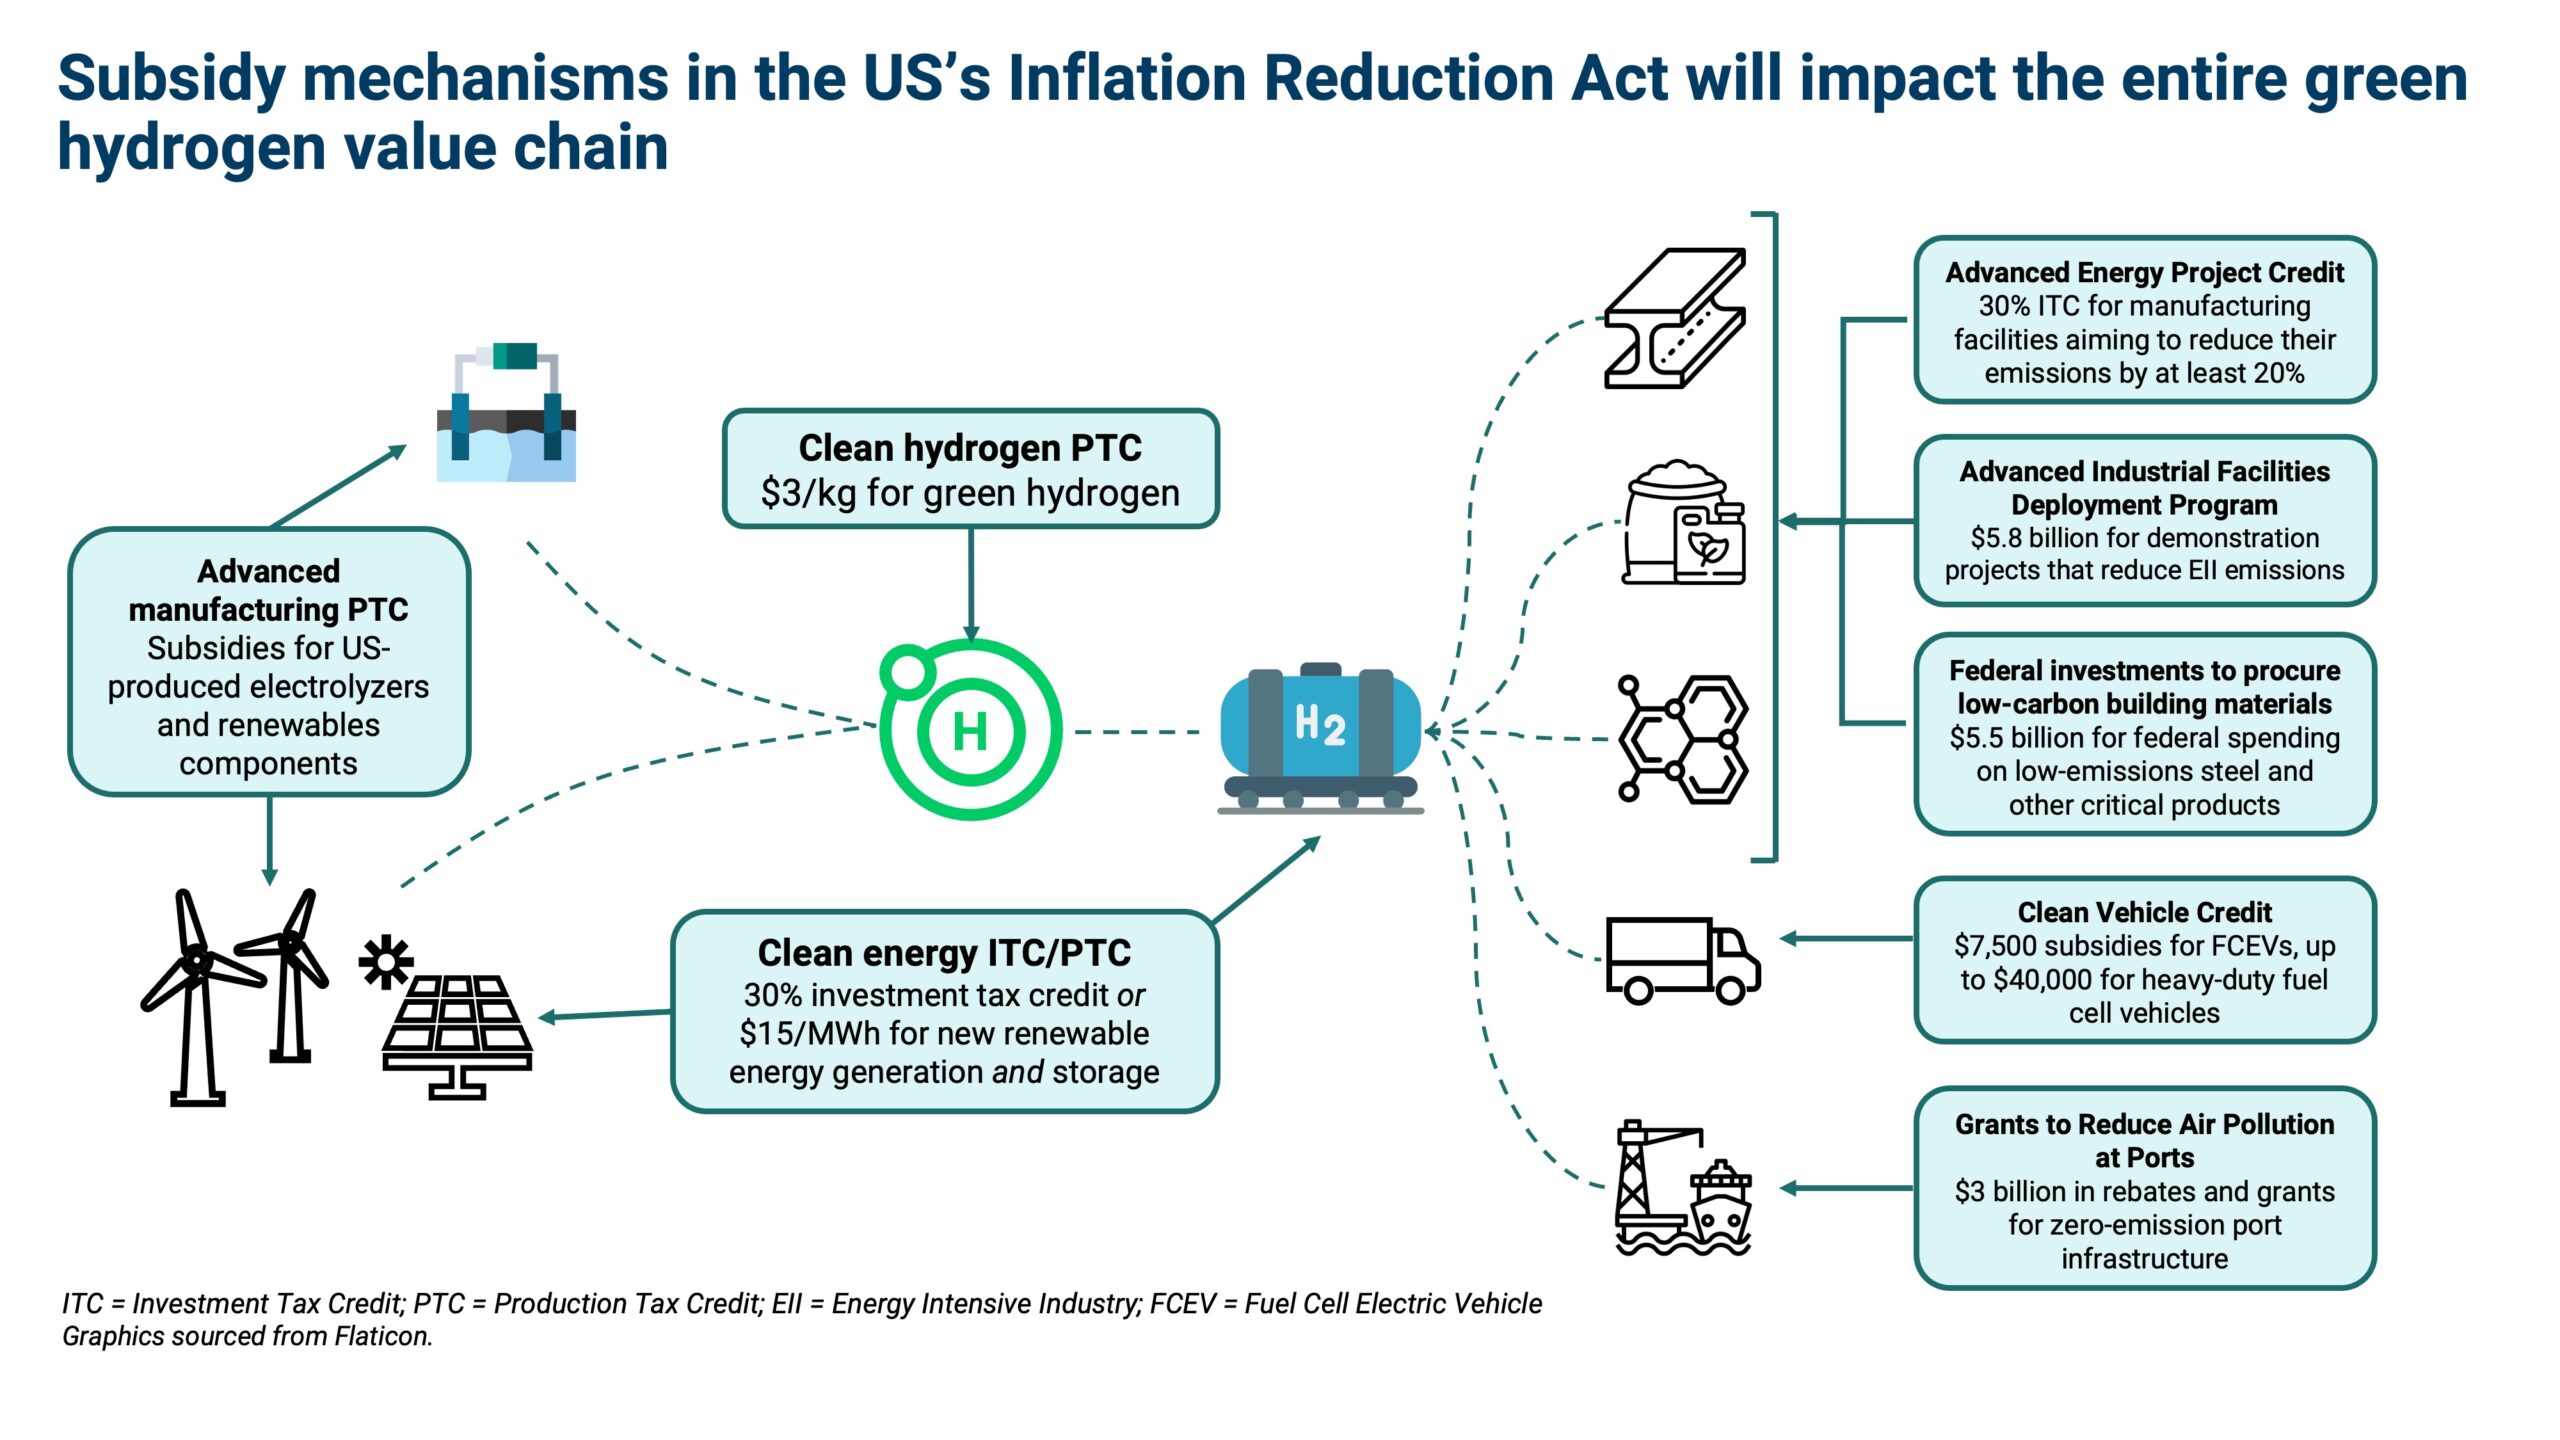 subsidy mechanisms in the US's inflation reduction act will impact the entire green hydrogen value chain